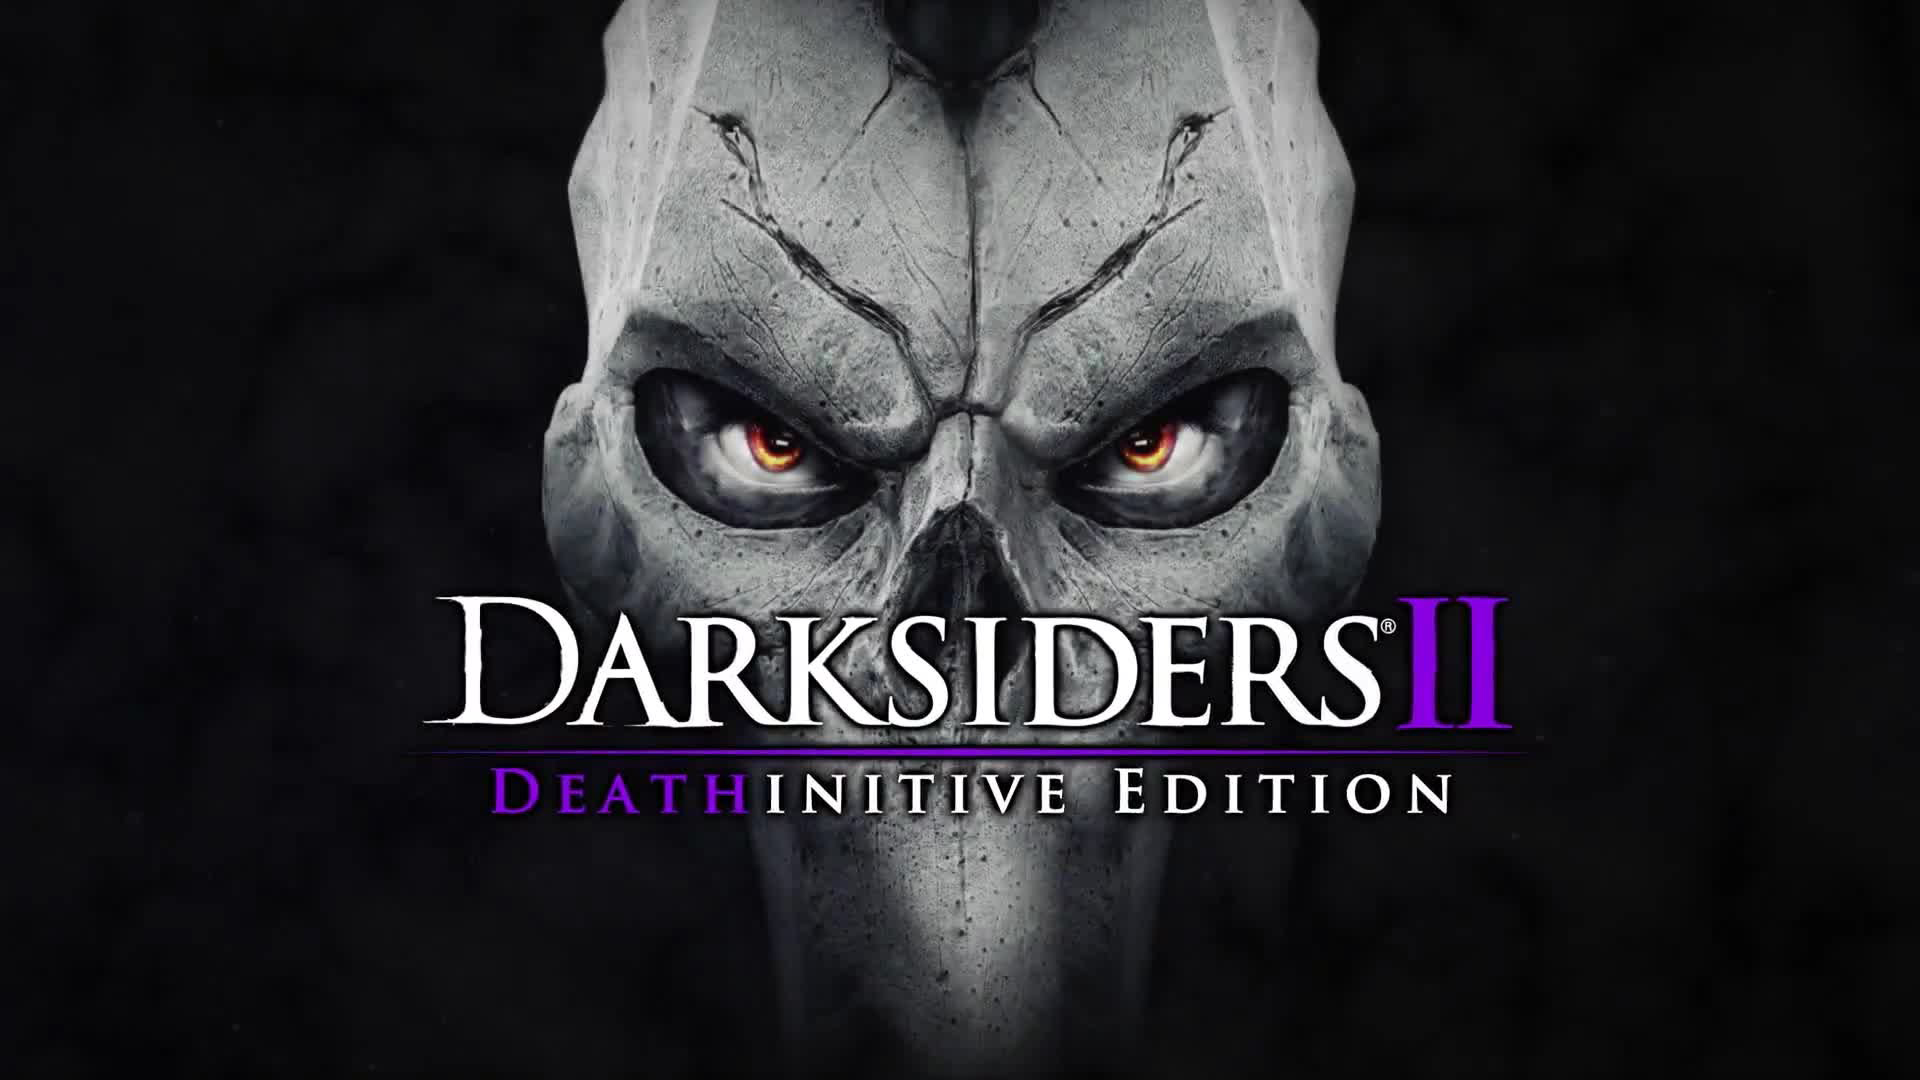 darksiders 2 deathinitive edition game save file location